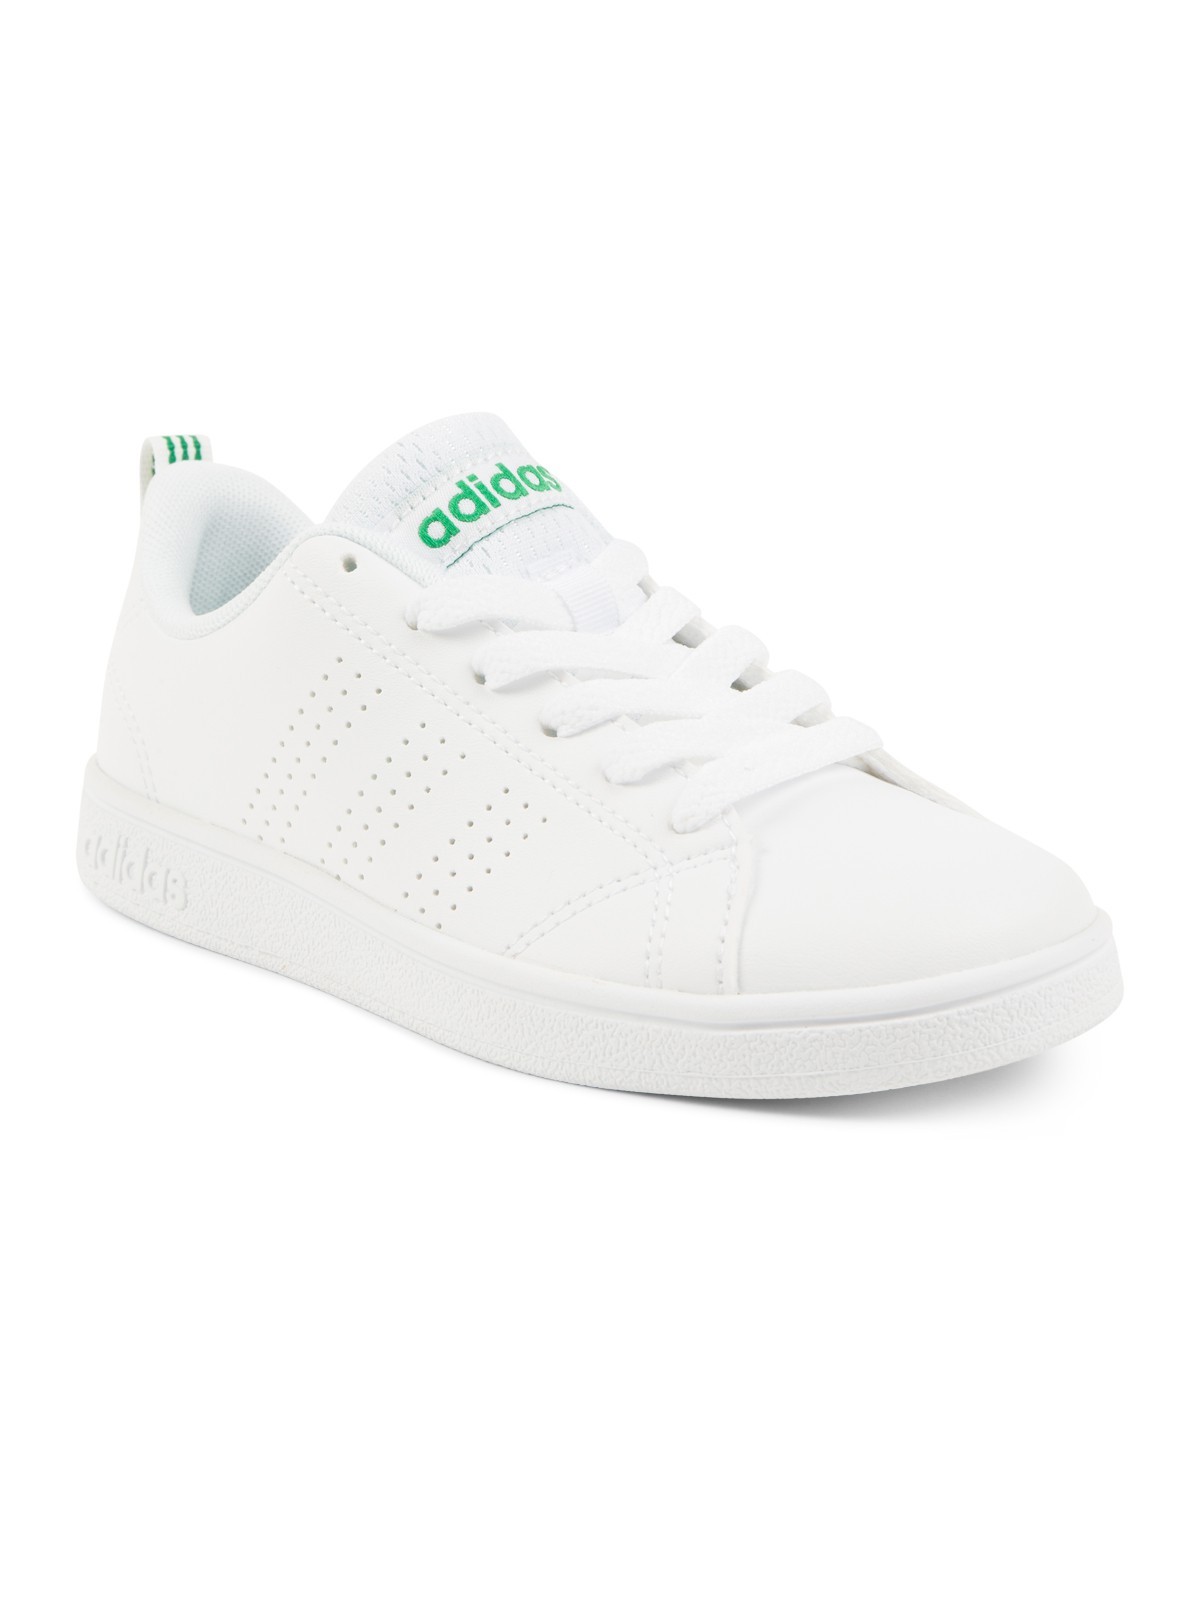 adidas fille blanche